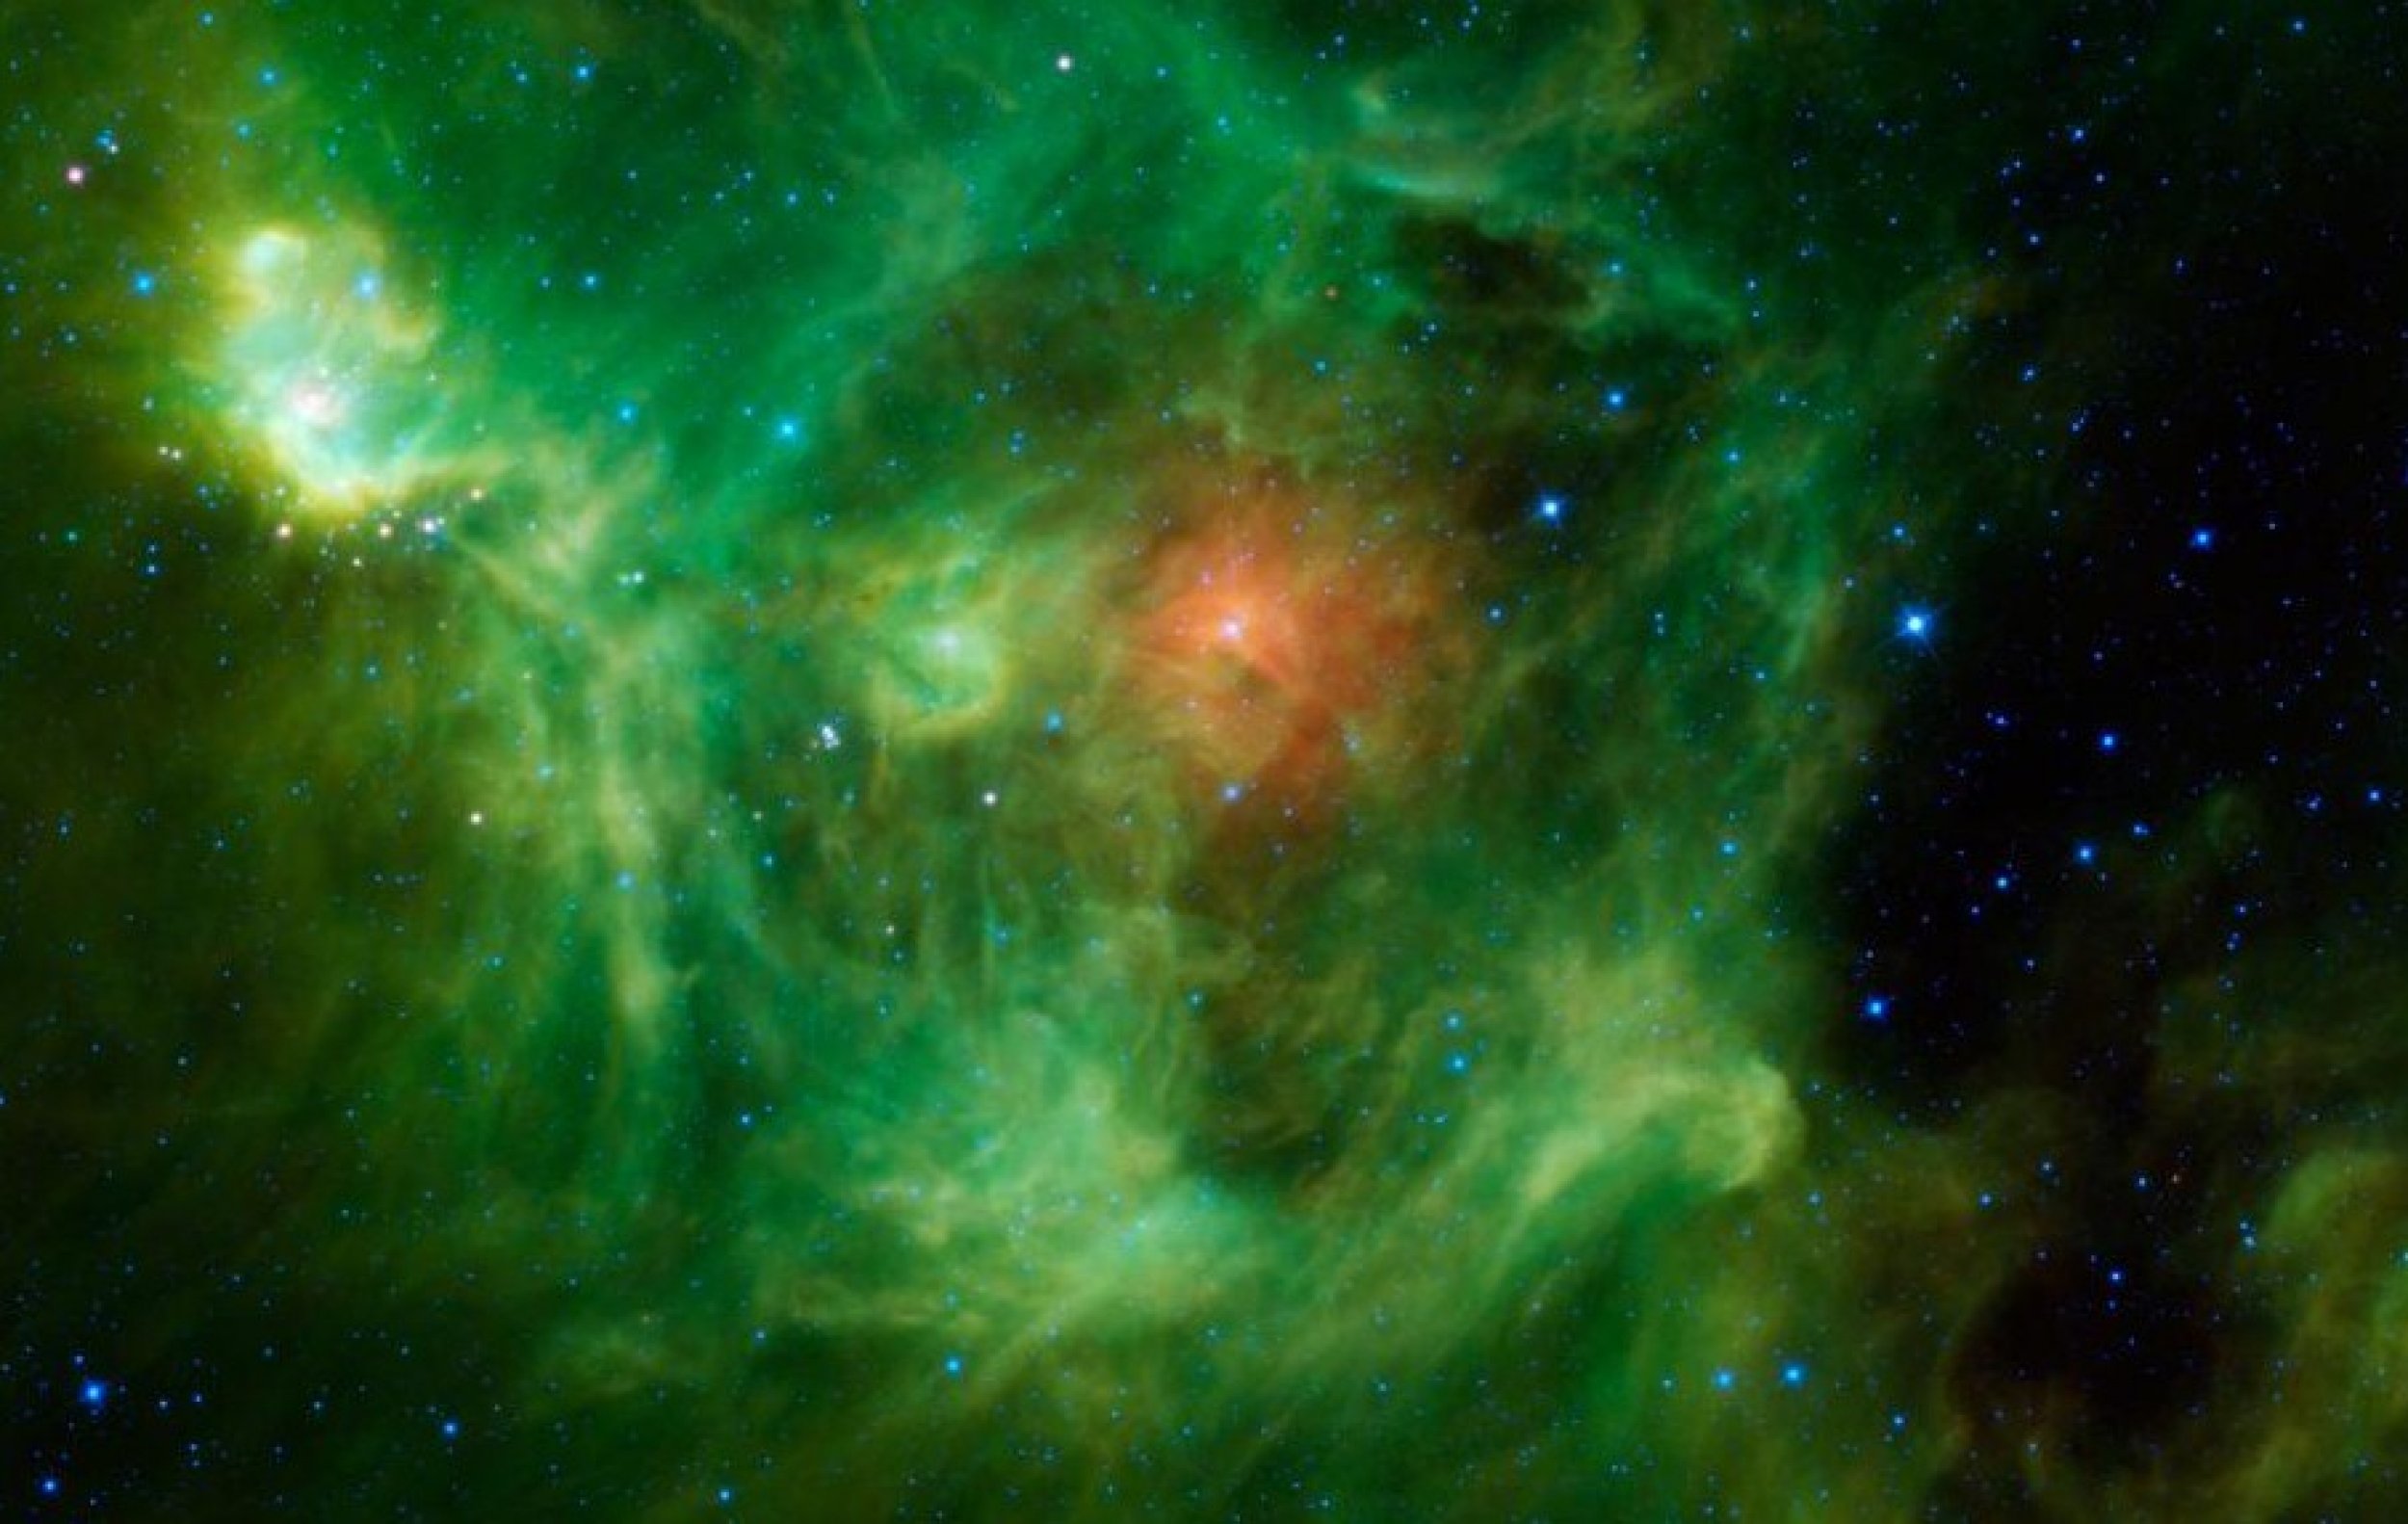 NASA releases image of quotMerry Christmas Wreath Nebulaquot from 1000 light-years away